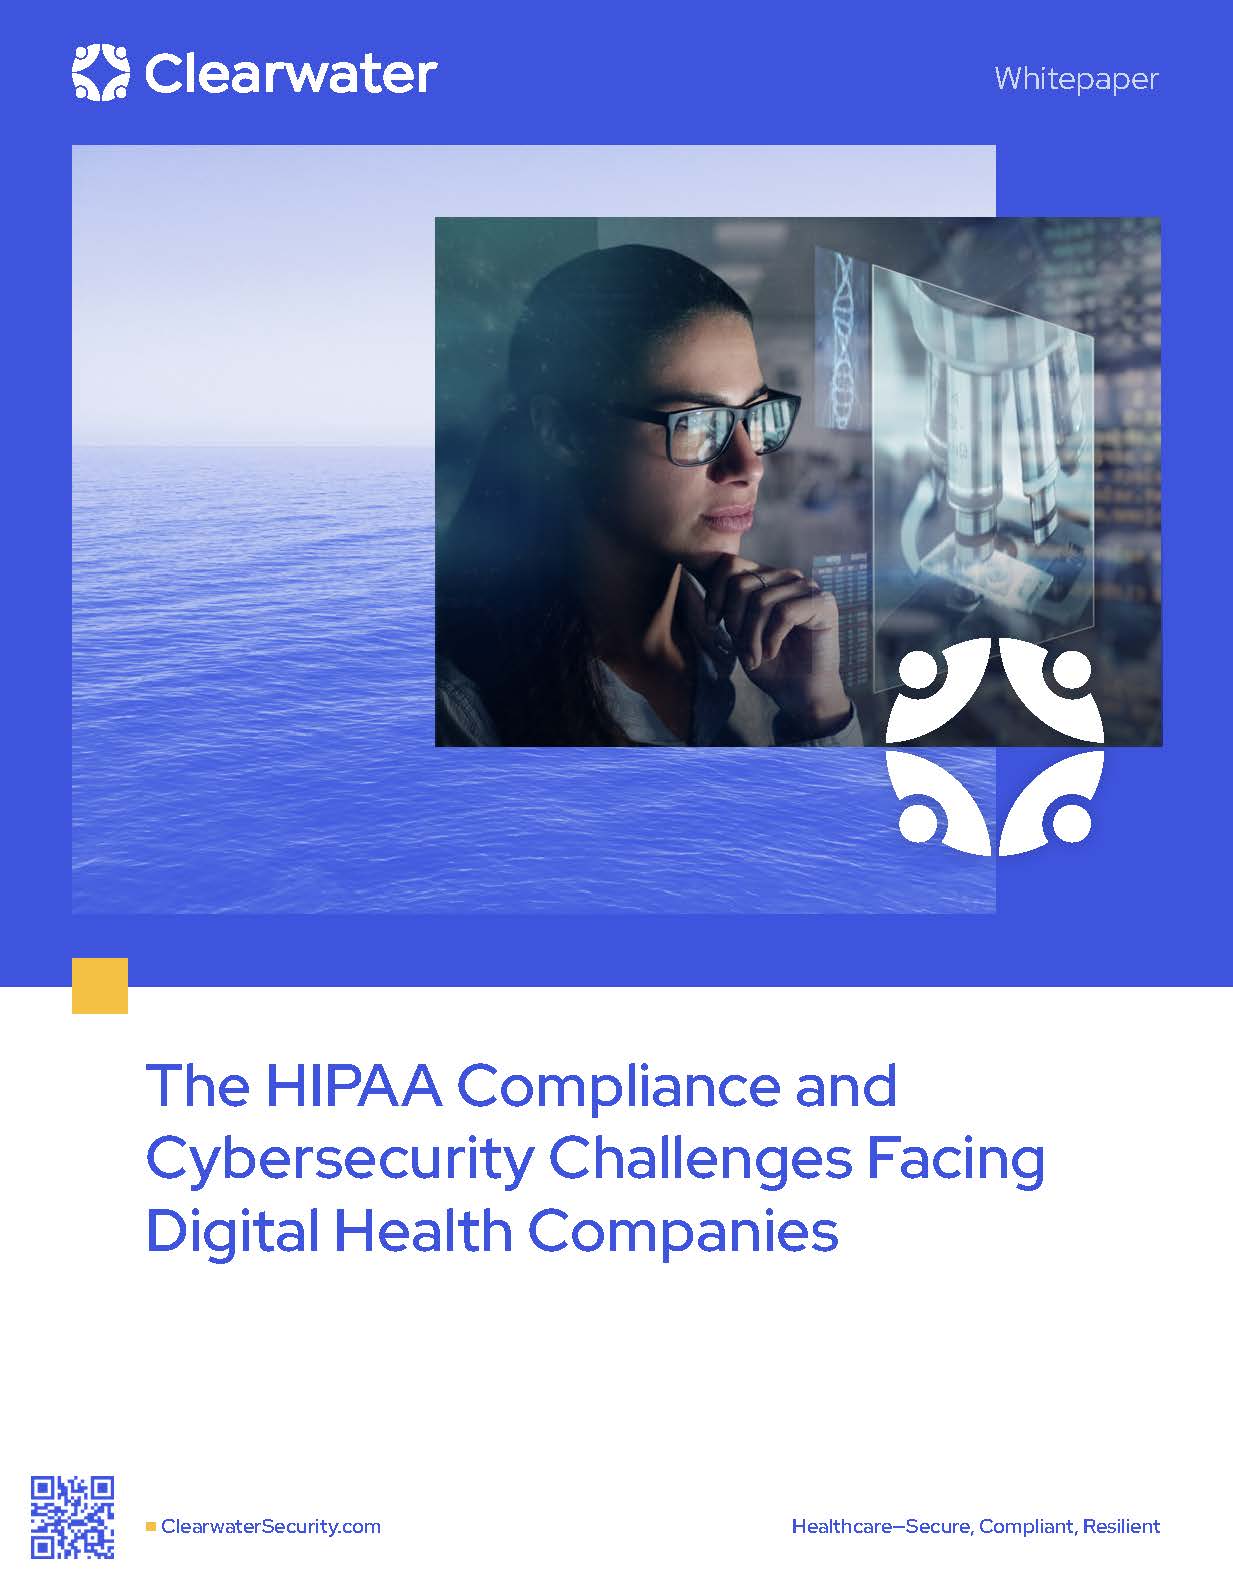 The HIPAA Compliance and Cybersecurity Challenges Facing Digital Health Companies by Clearwater